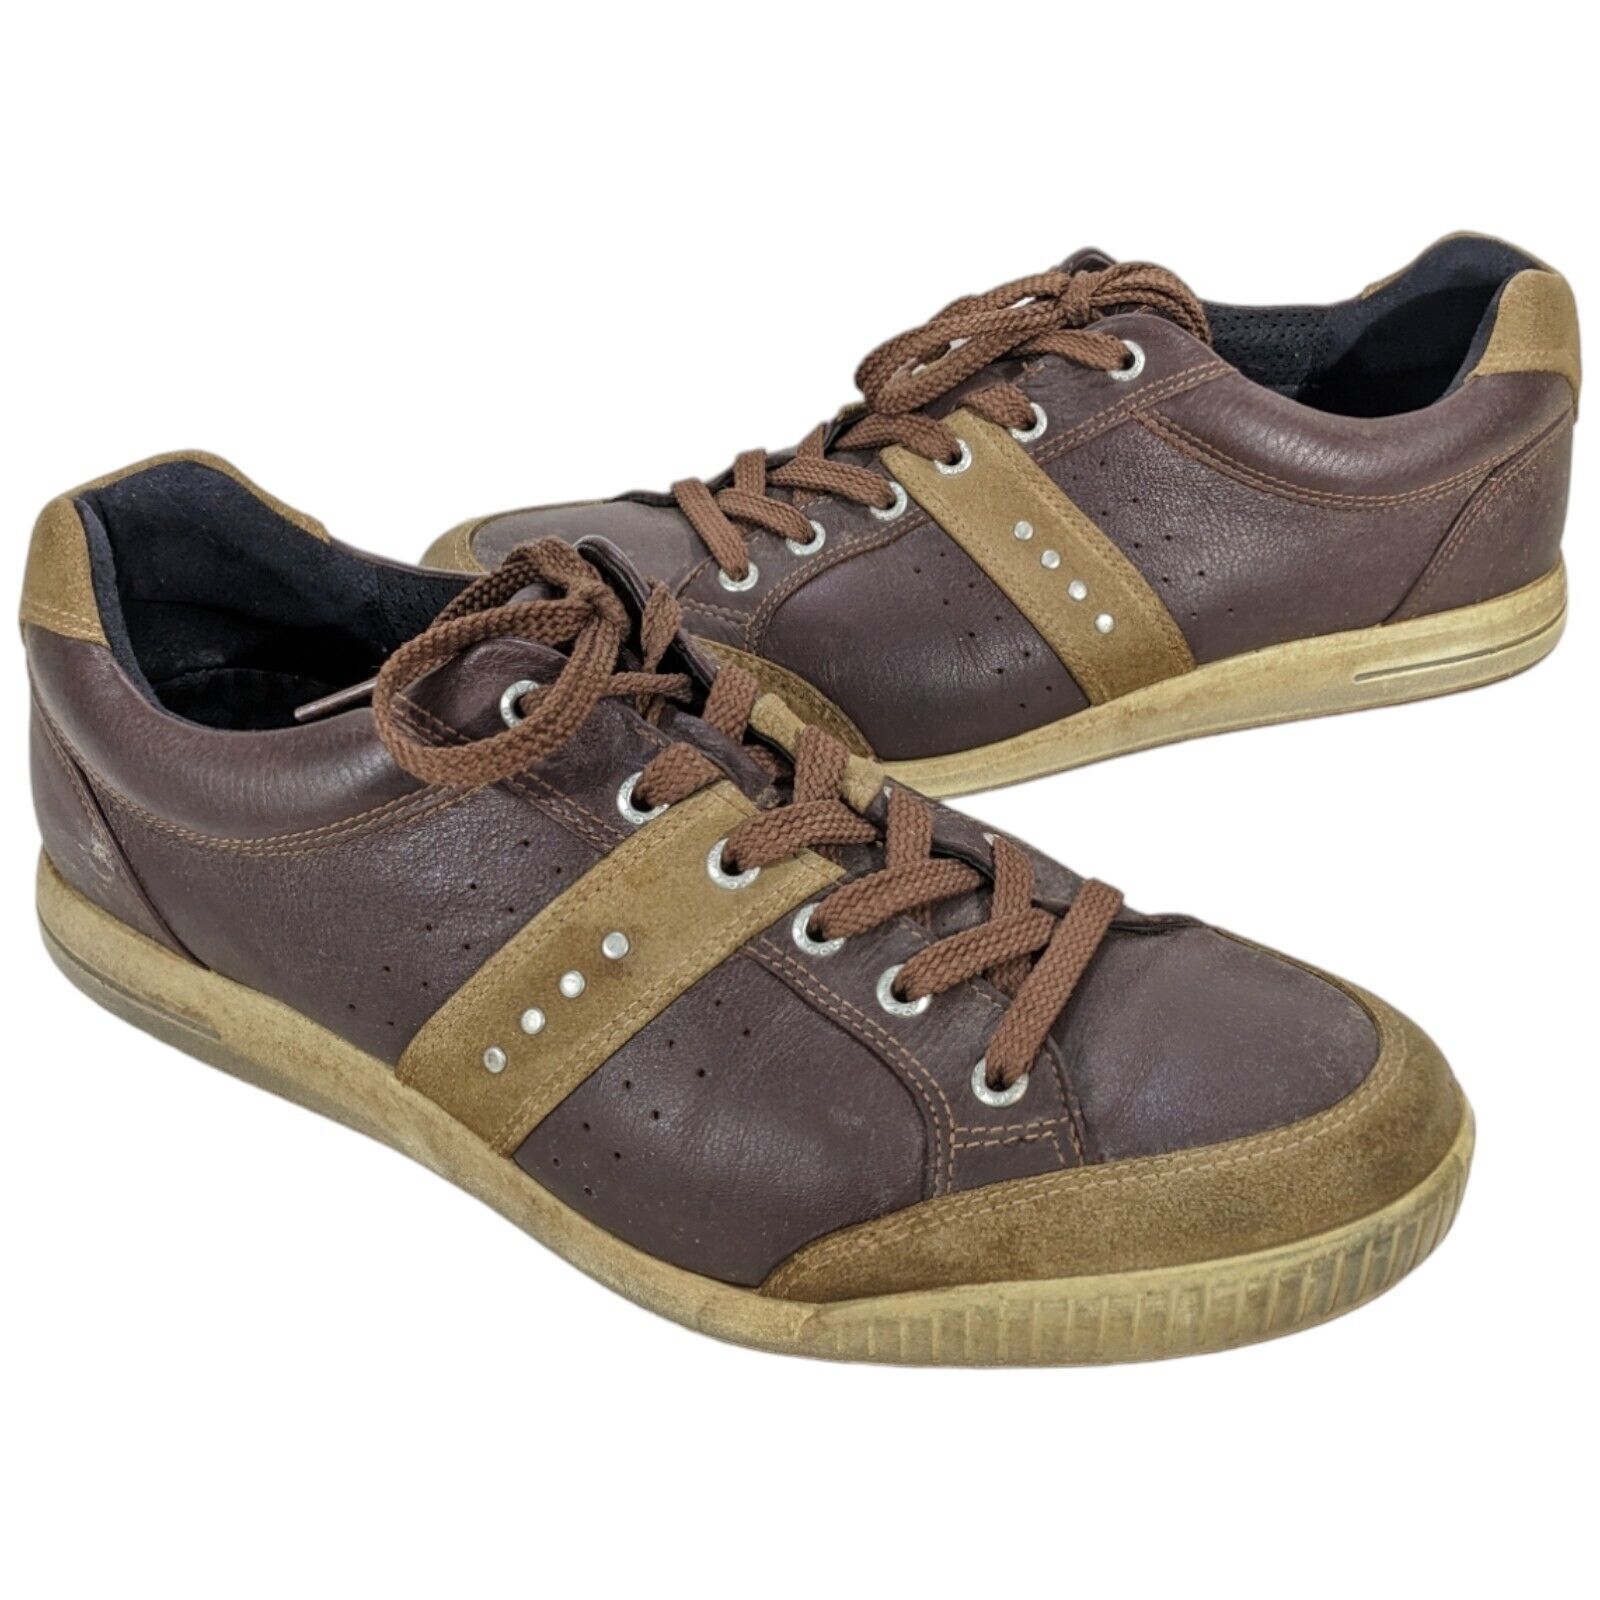 ECCO Street Premier Brown Leather Spikeless Hybrid Golf Shoes EUR 46 Mens US 13